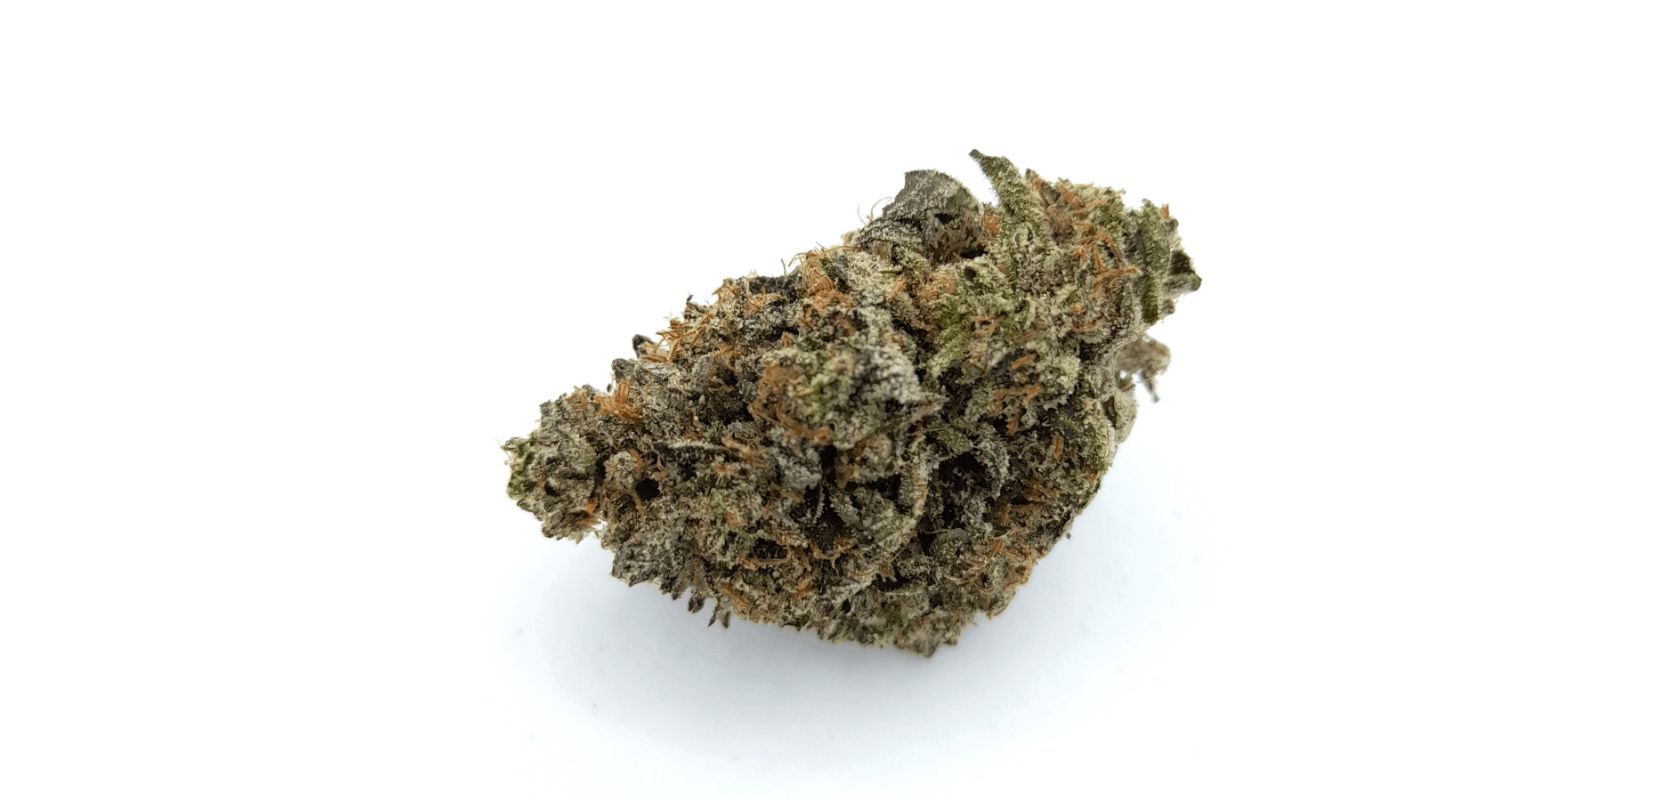 The Hi Octane strain also has an uplifting and mood-enhancing effect that may relieve stress and anxiety.